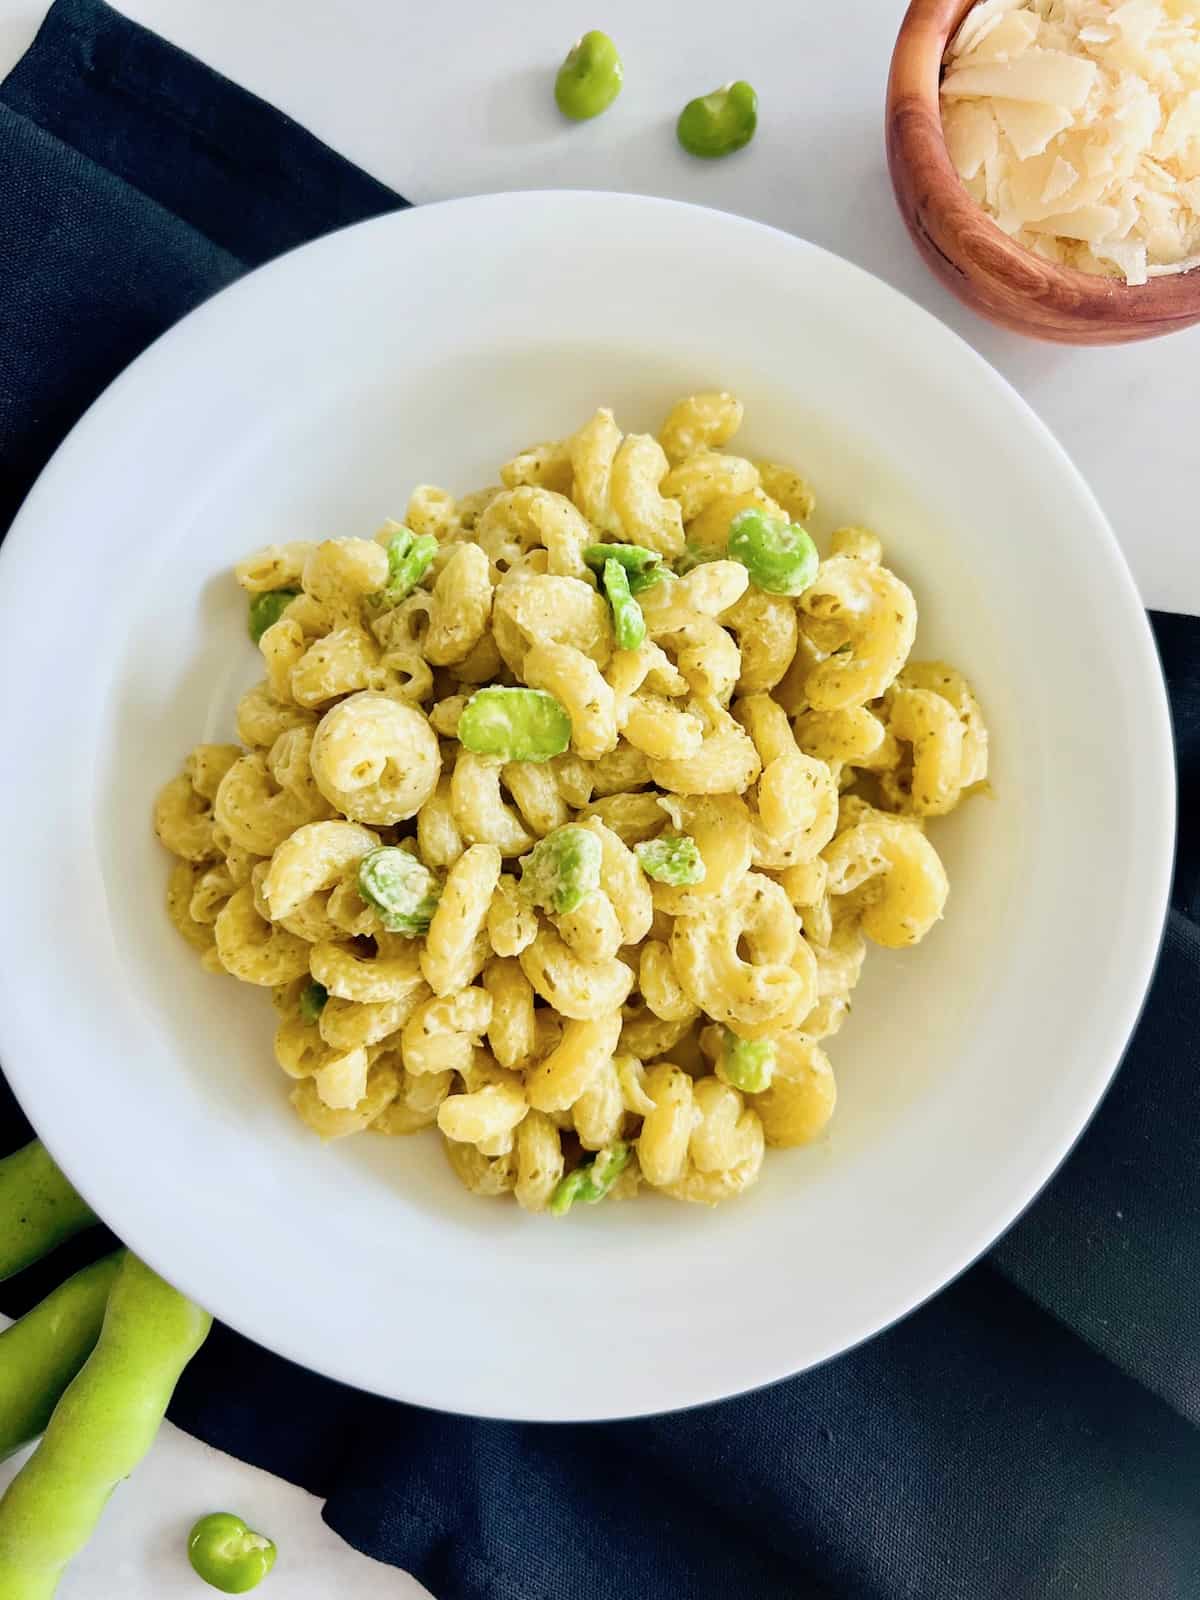 Creamy Pesto Pasta with Fava Beans Plated Ready to eat with a black napkin.